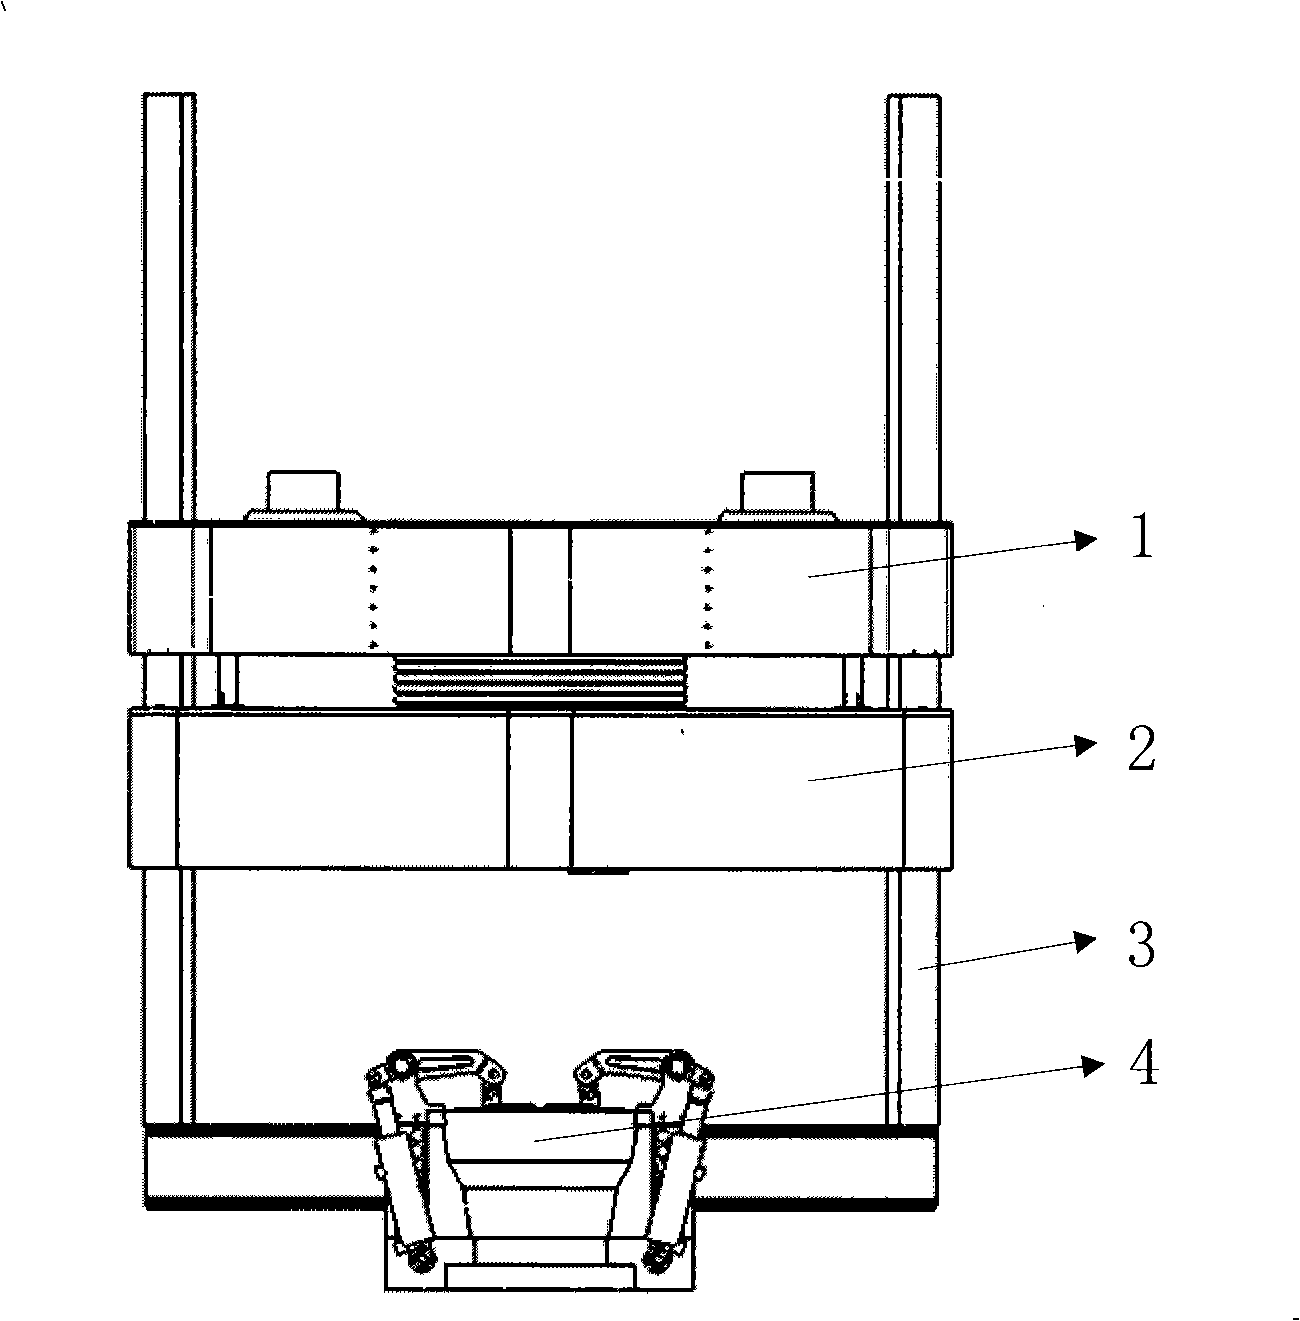 Automatized shaft mouth operation clamp for petroleum well workover